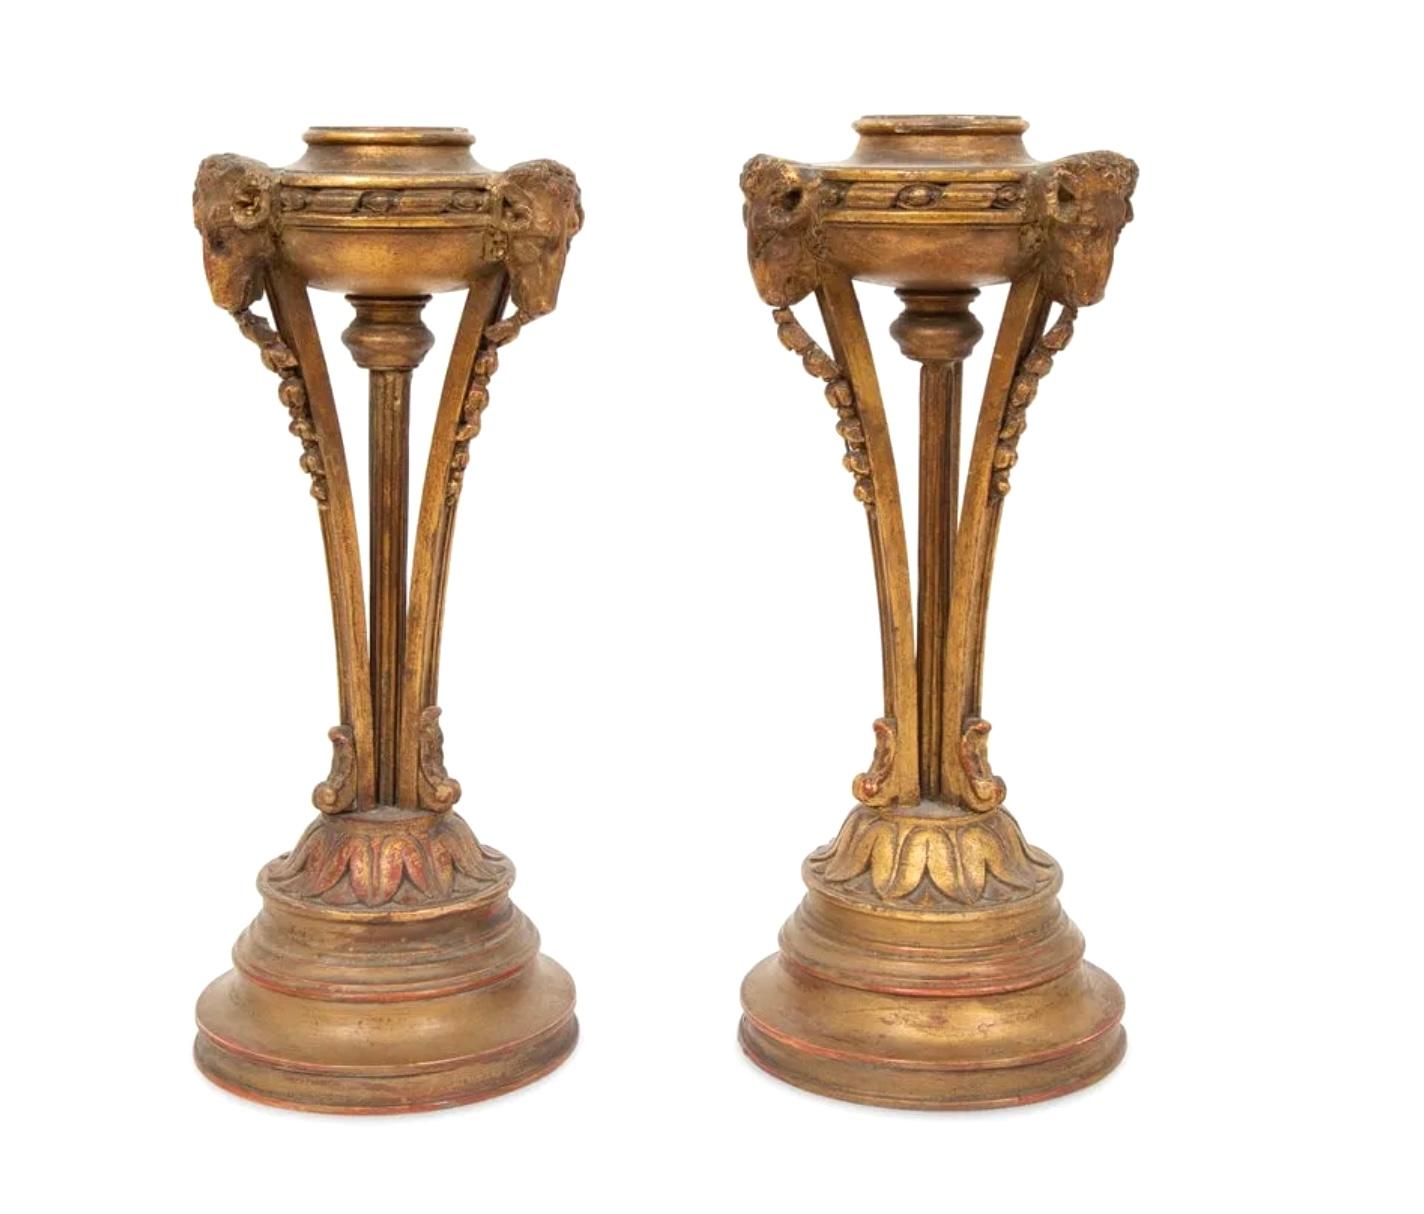 Pair of late 19th/Early 20th Century carved giltwood torchieres. Each with ram's head supports, made as lamp but with no fittings (bases only). Can be used with candles or made into lamps.
